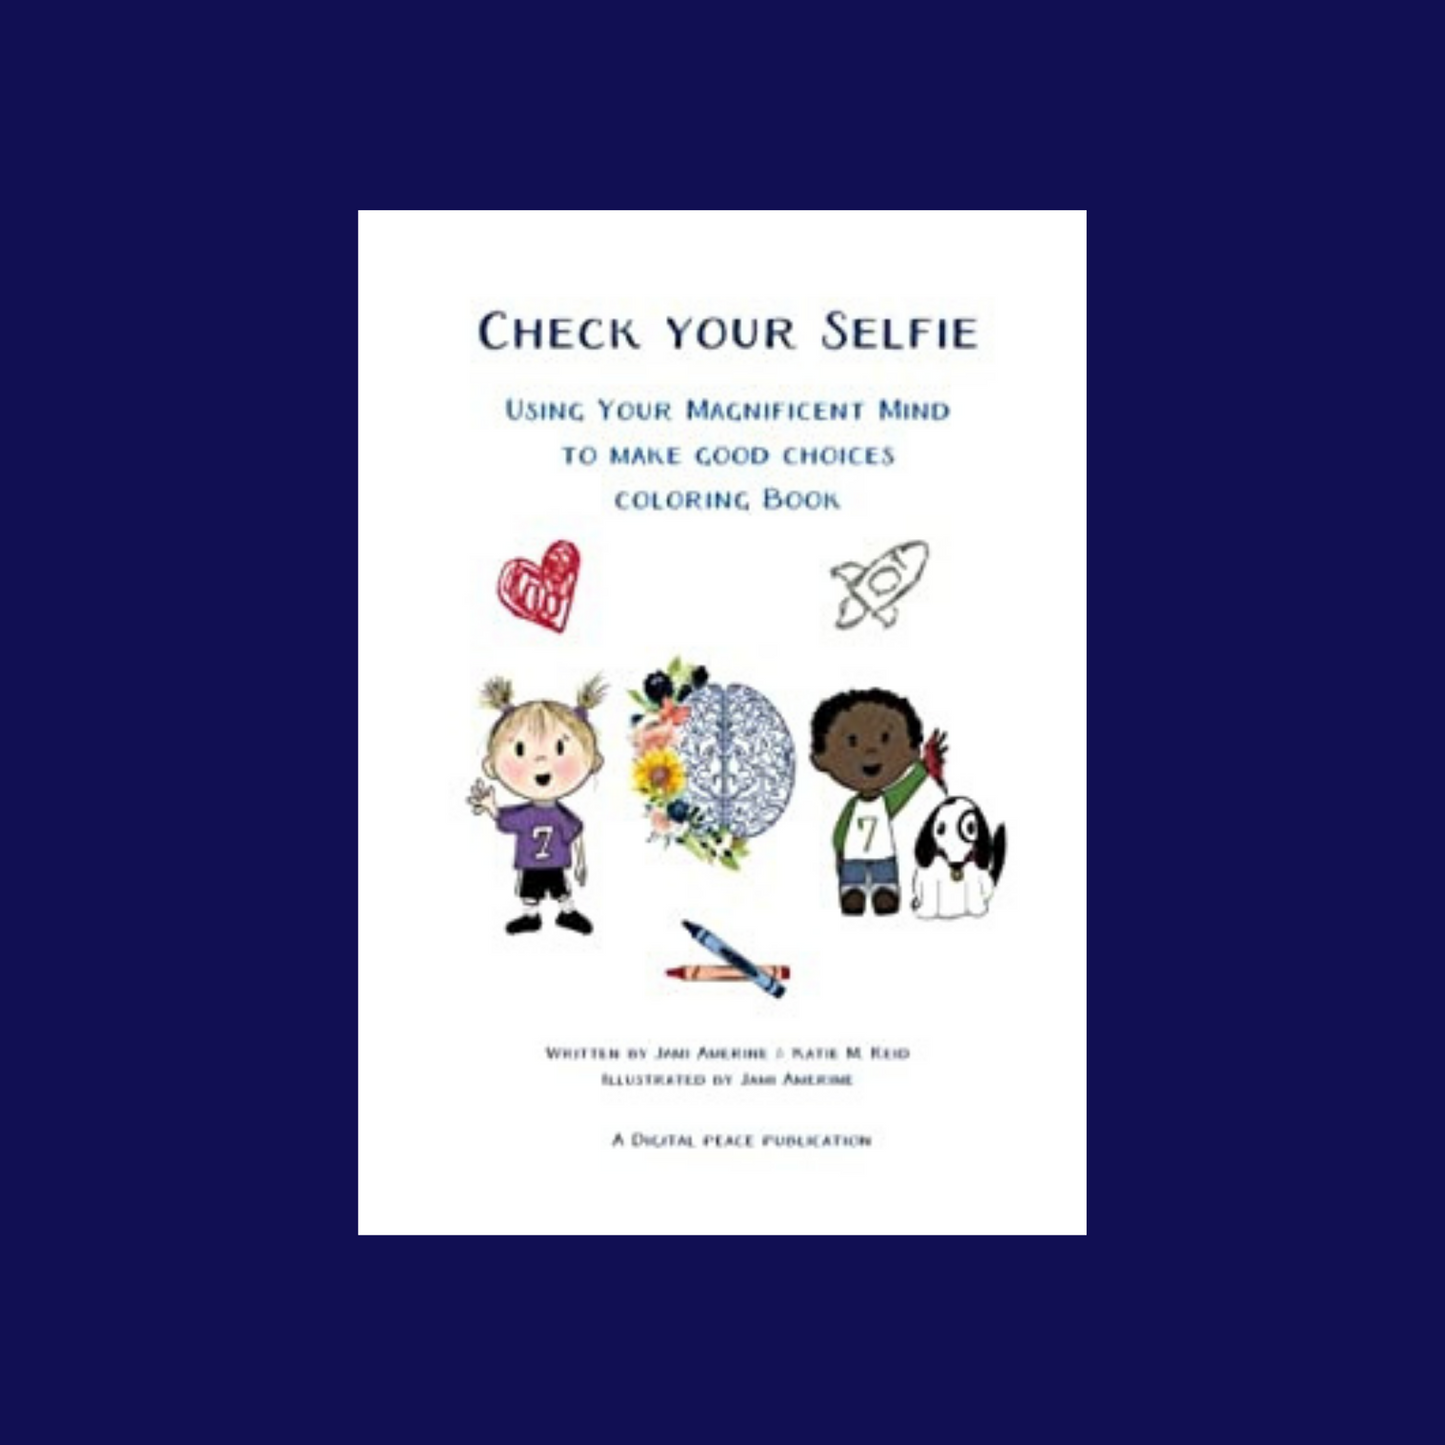 Check Your Selfie Coloring Book